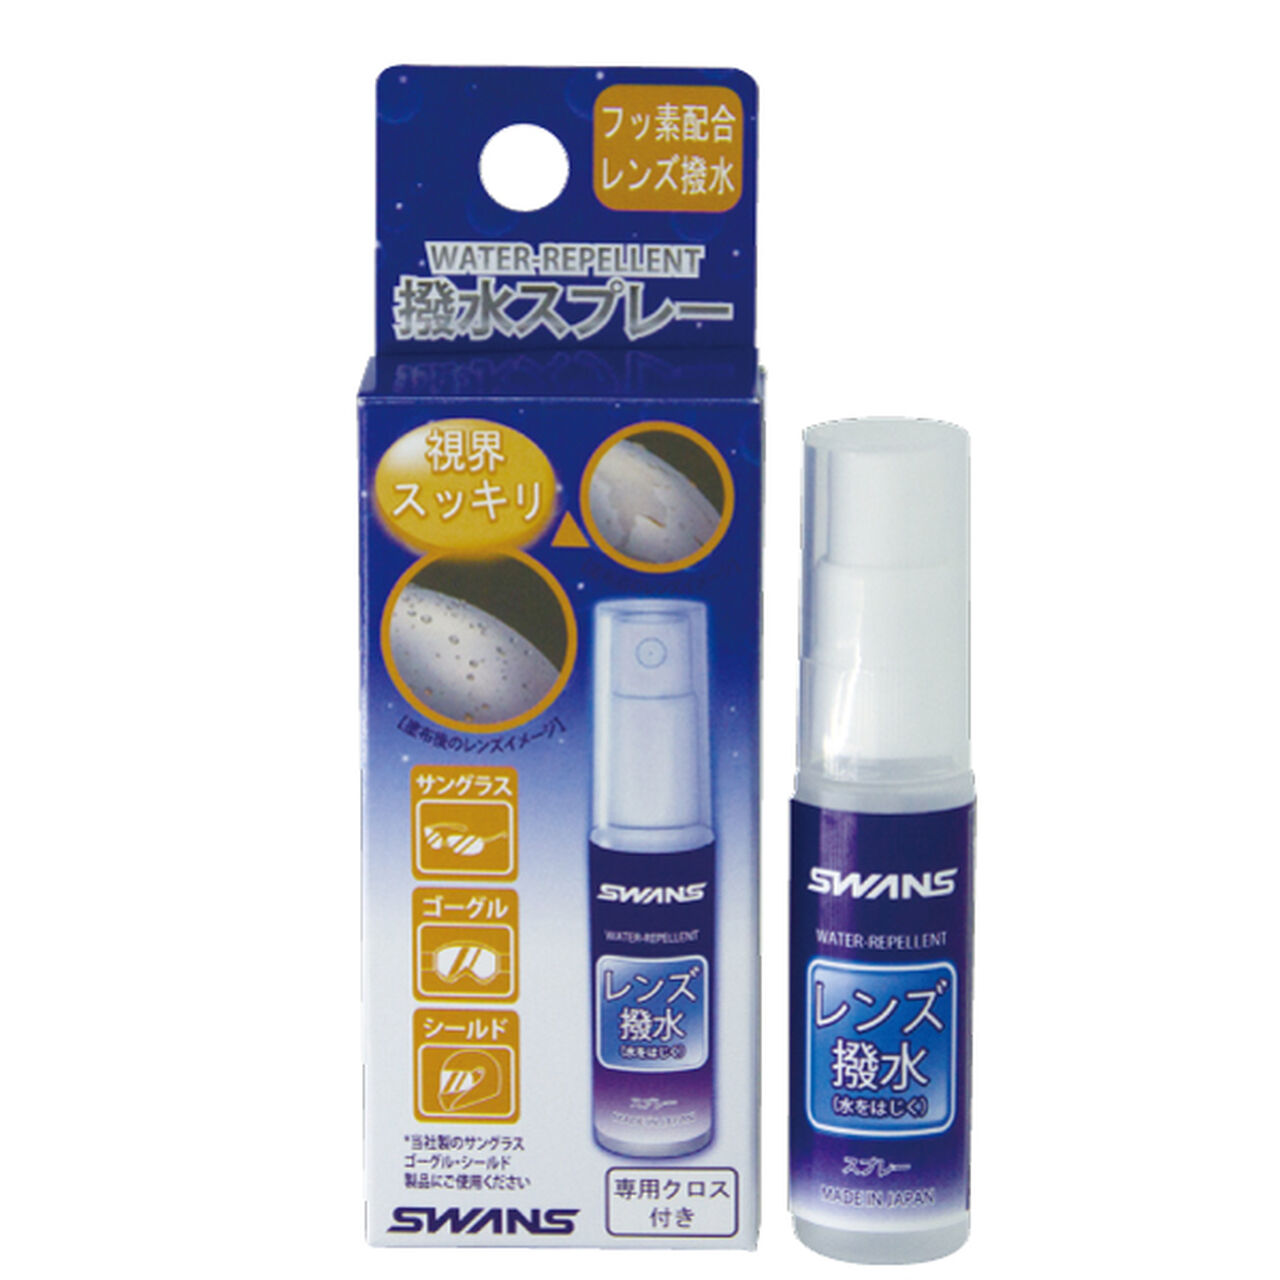 A-49 Water-repellent Spray,Opt1, large image number 0